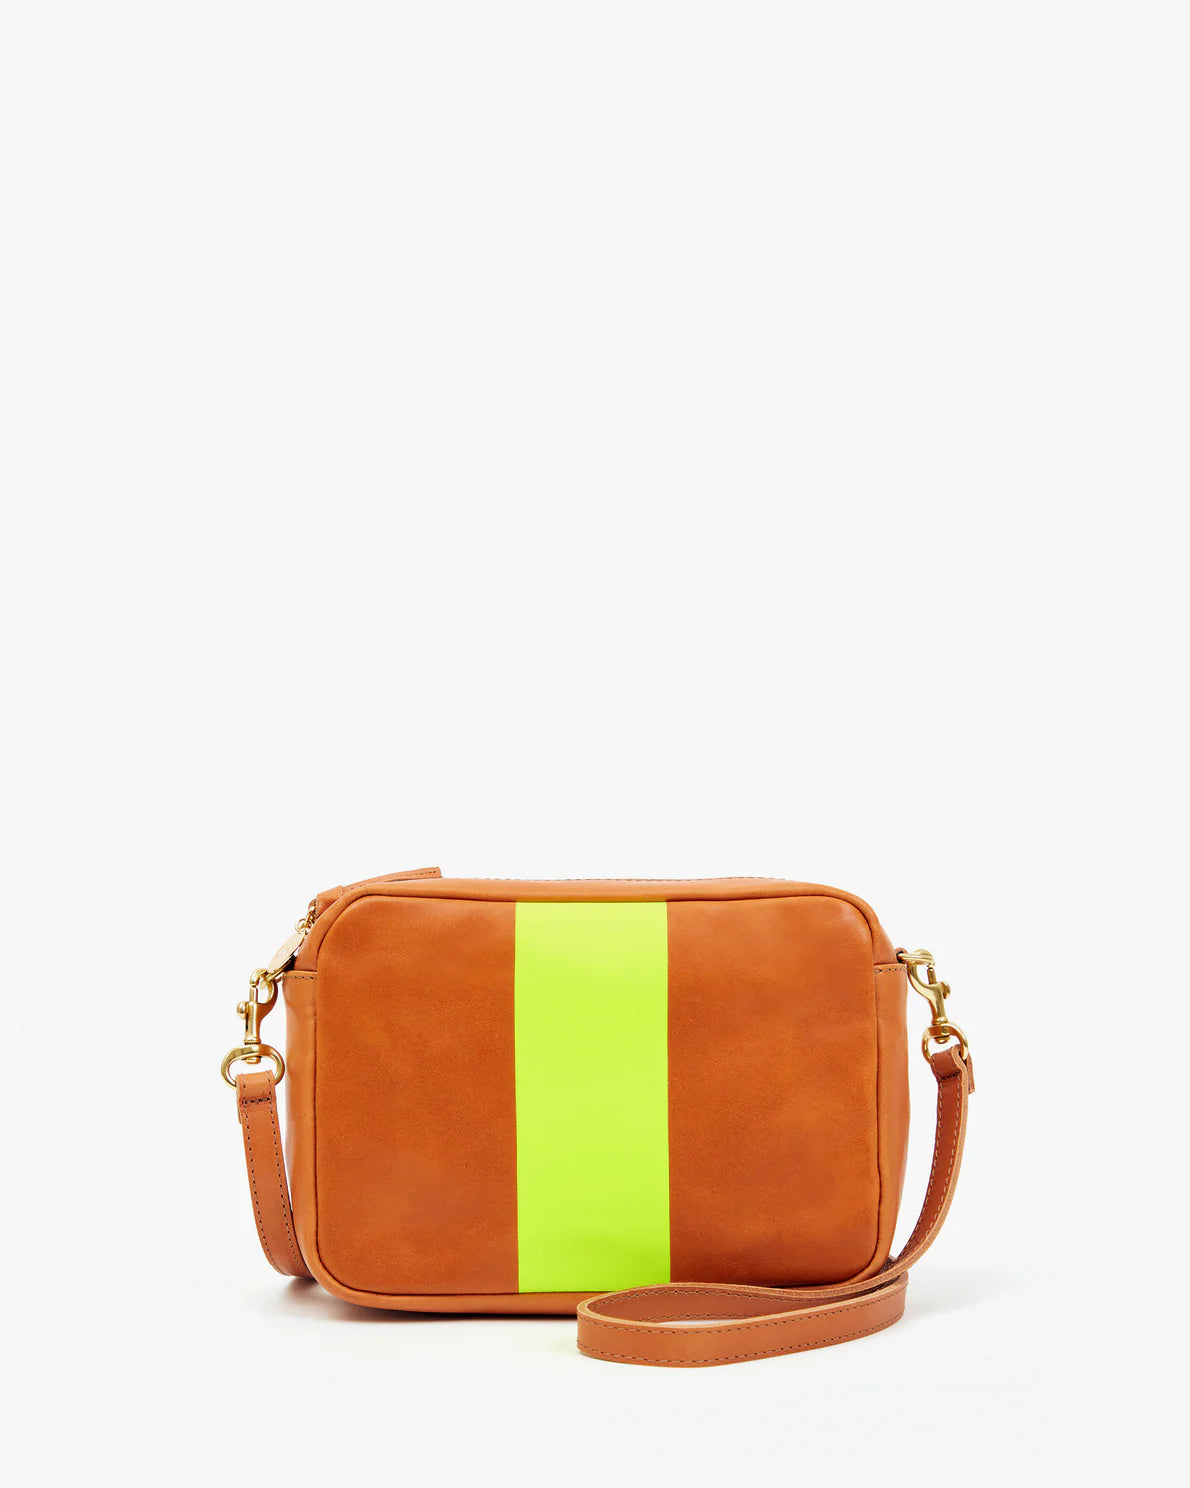 A brown handwoven leather shoulder bag with a bright yellow-green vertical stripe in the center. The rectangular crossbody bag, Claire Vivier Midi Sack, has a detachable strap with gold-tone clasps and a zipper closure on top. The background is plain white, making it perfect for day-to-night use.